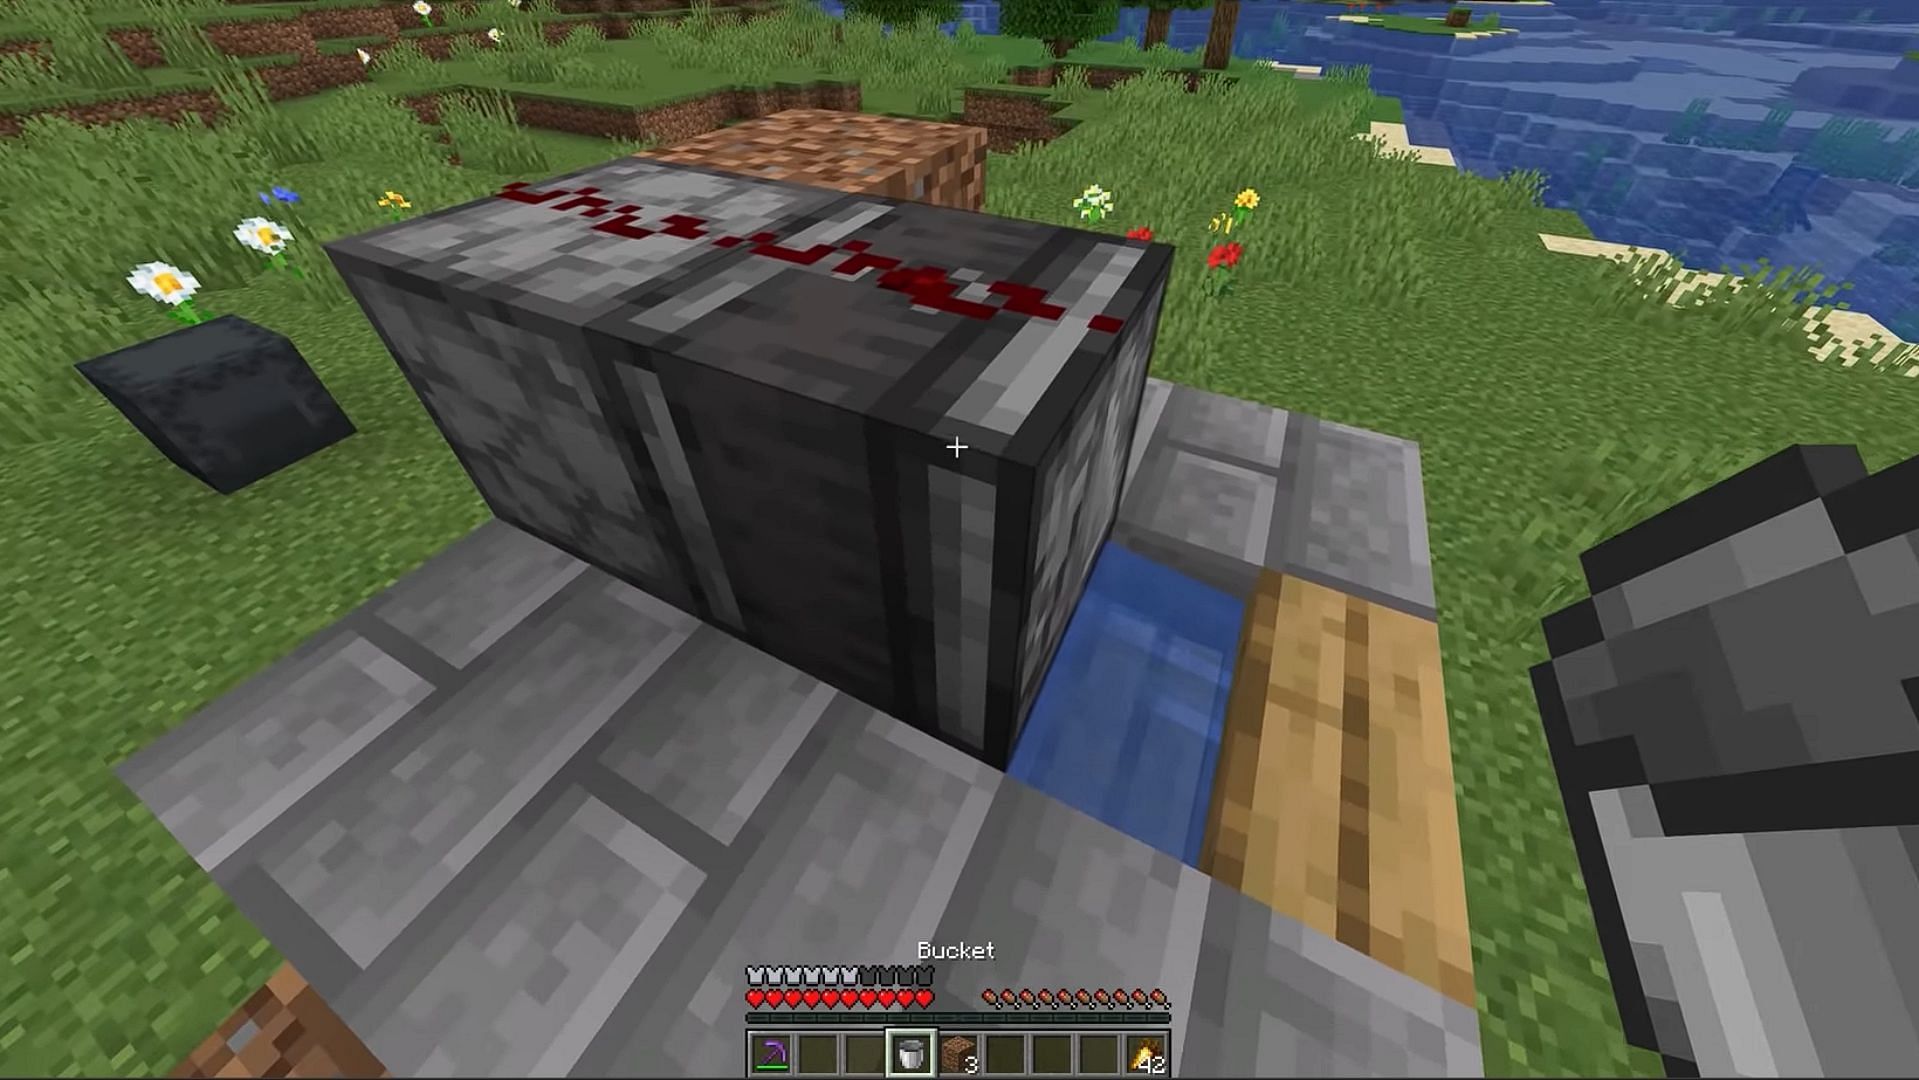 The dropper will keep giving concrete powder as soon as the generated concrete is mined in the Minecraft farm (Image via YouTube/Shulkercraft)